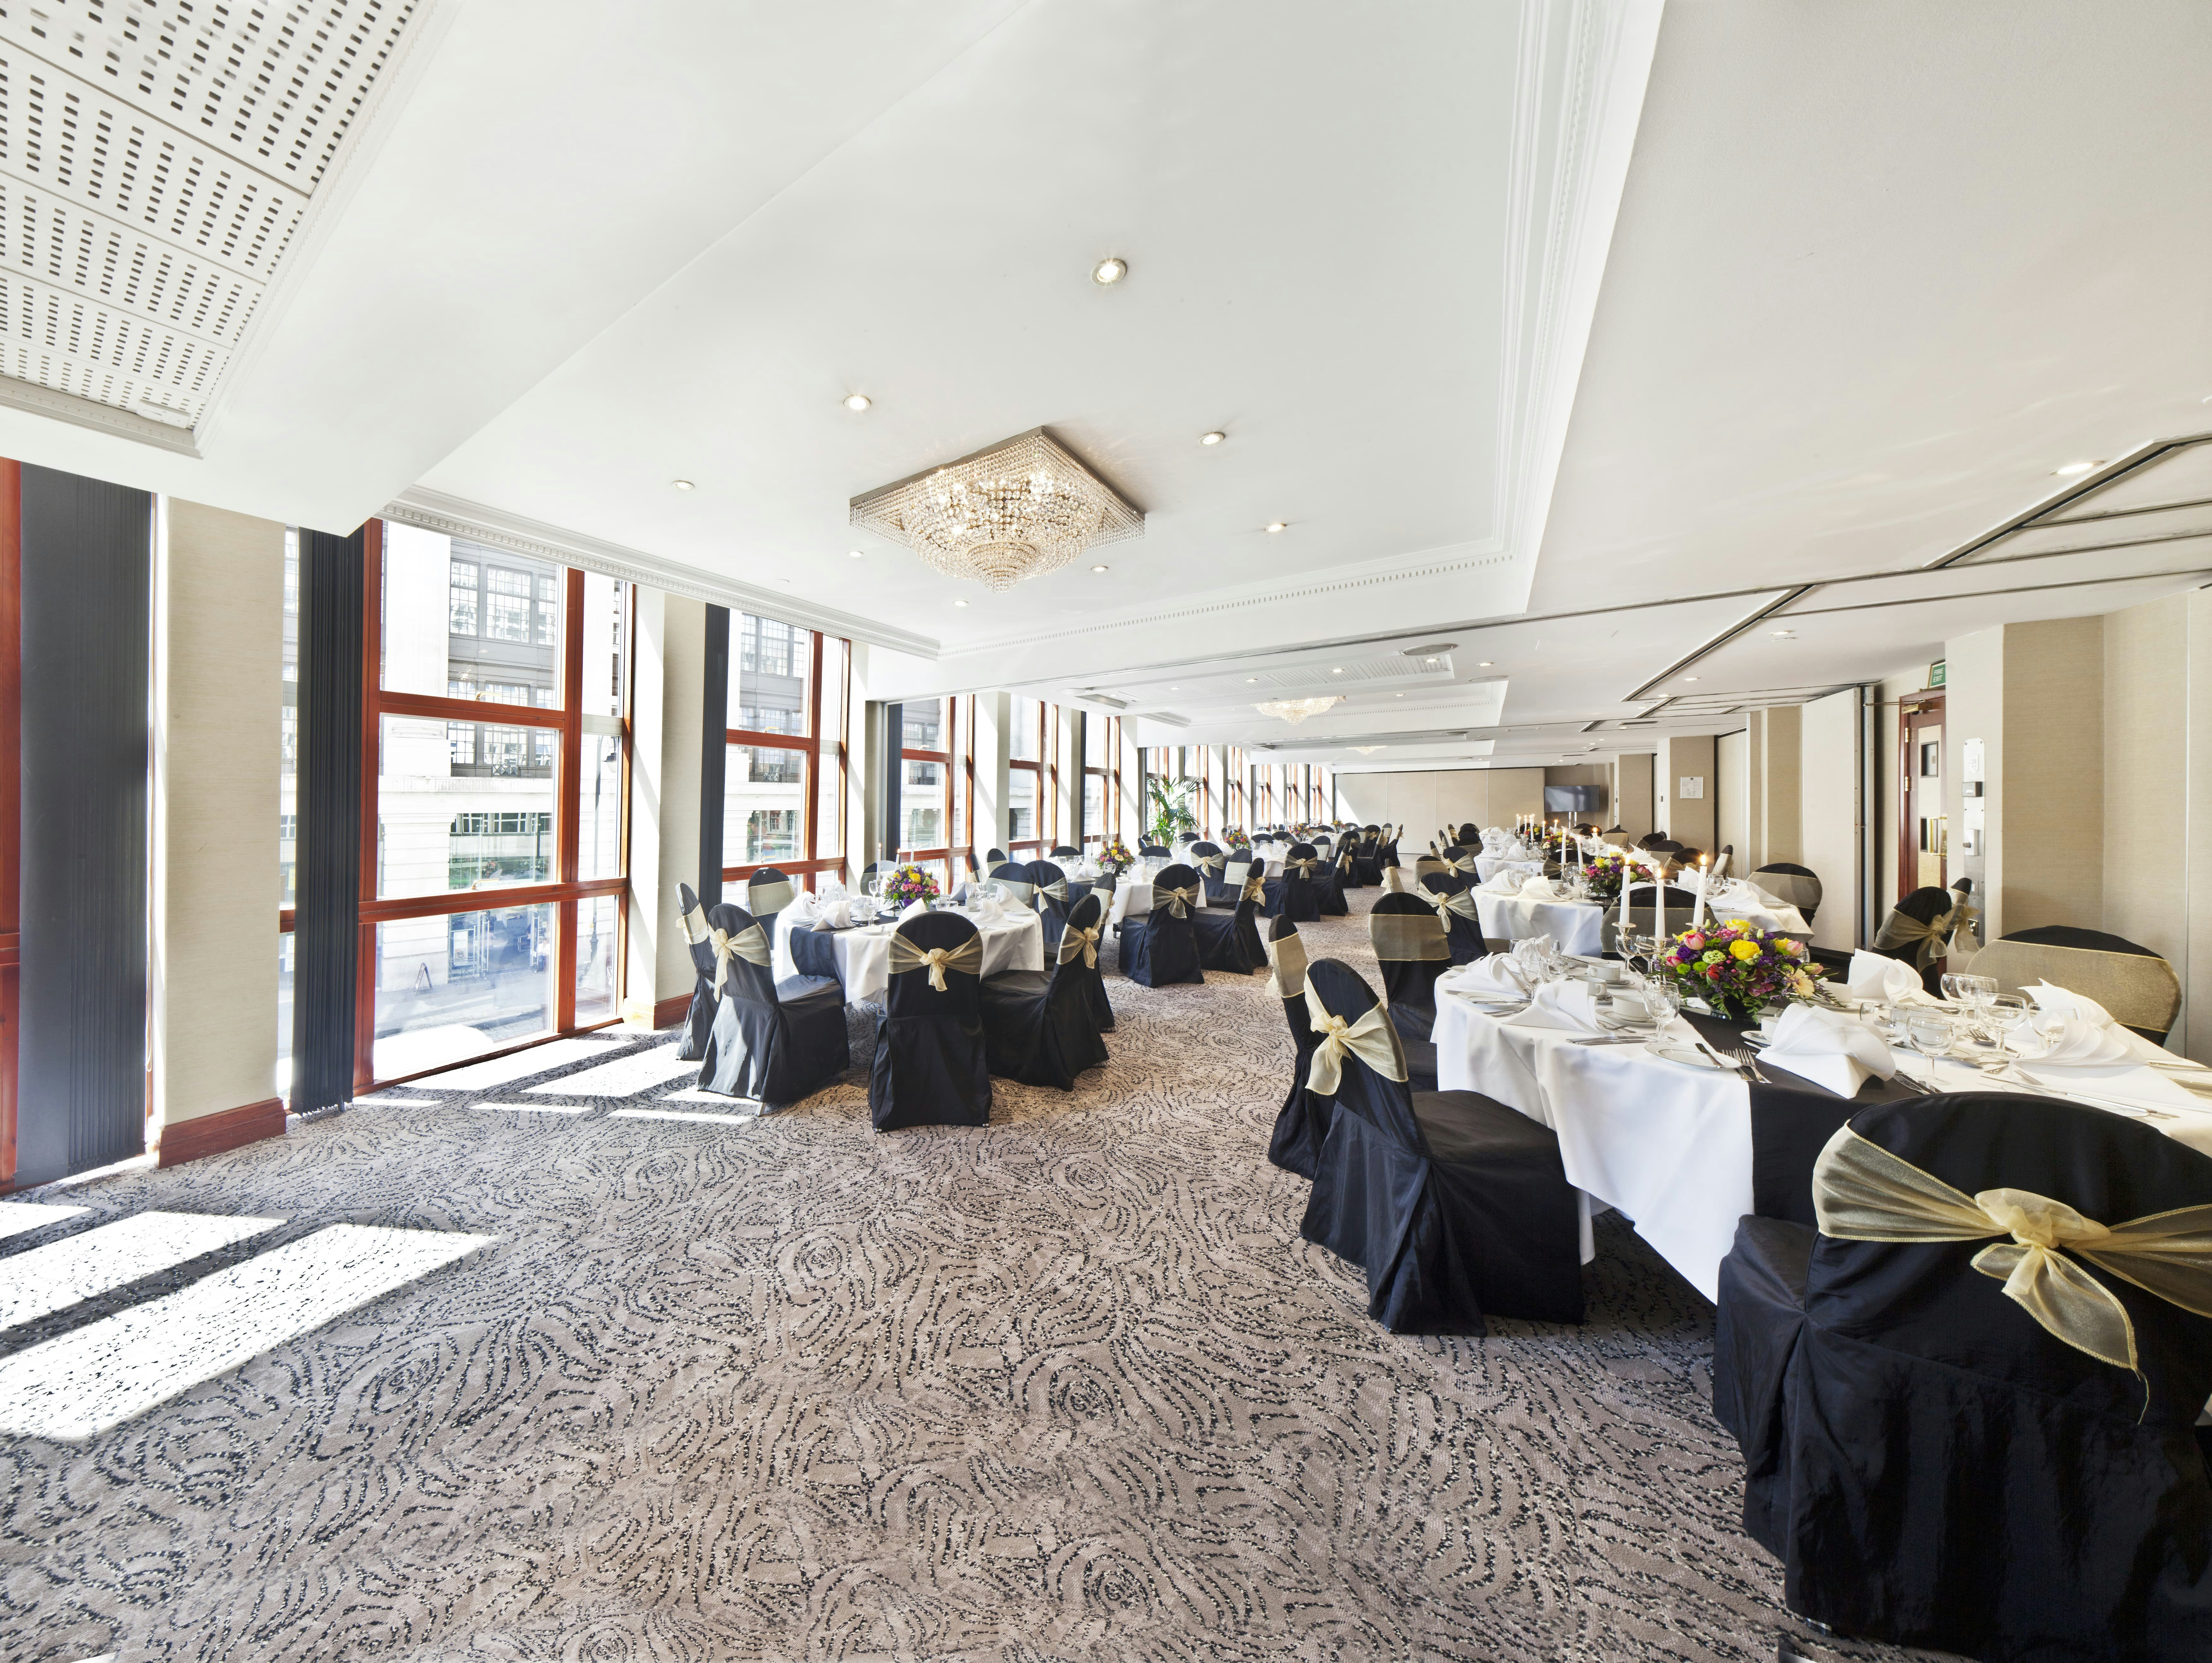 Hotel Conferences Venues in Central London - Jurys Inn London Holborn